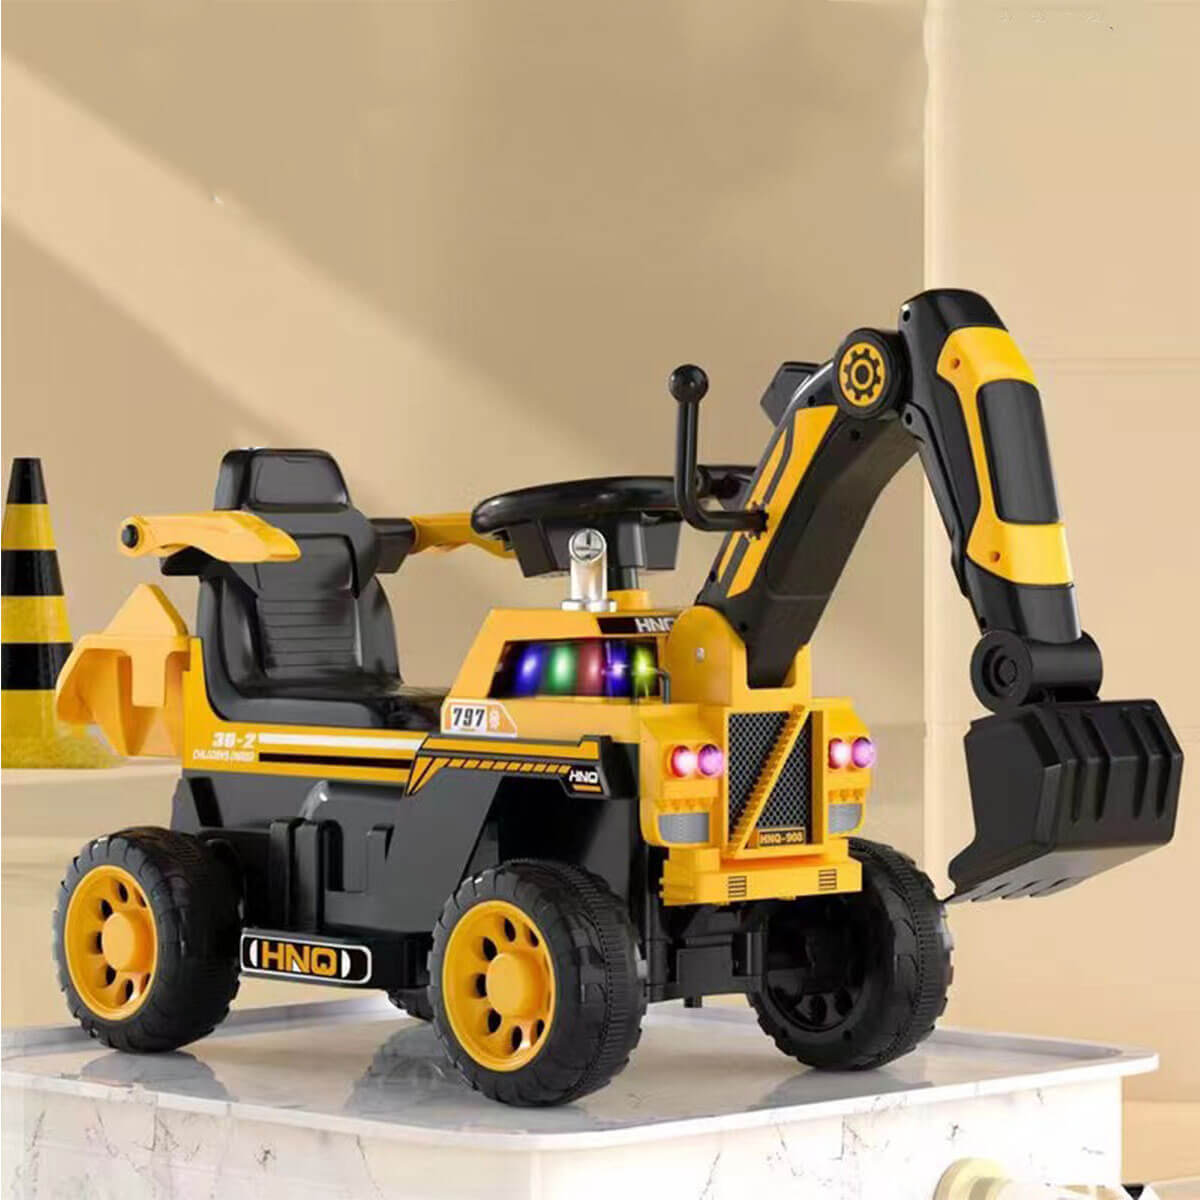 3-in-1 Kids Ride On Excavator Outdoor Indoor Ride-On Car With Front Loader Digger & Light Music